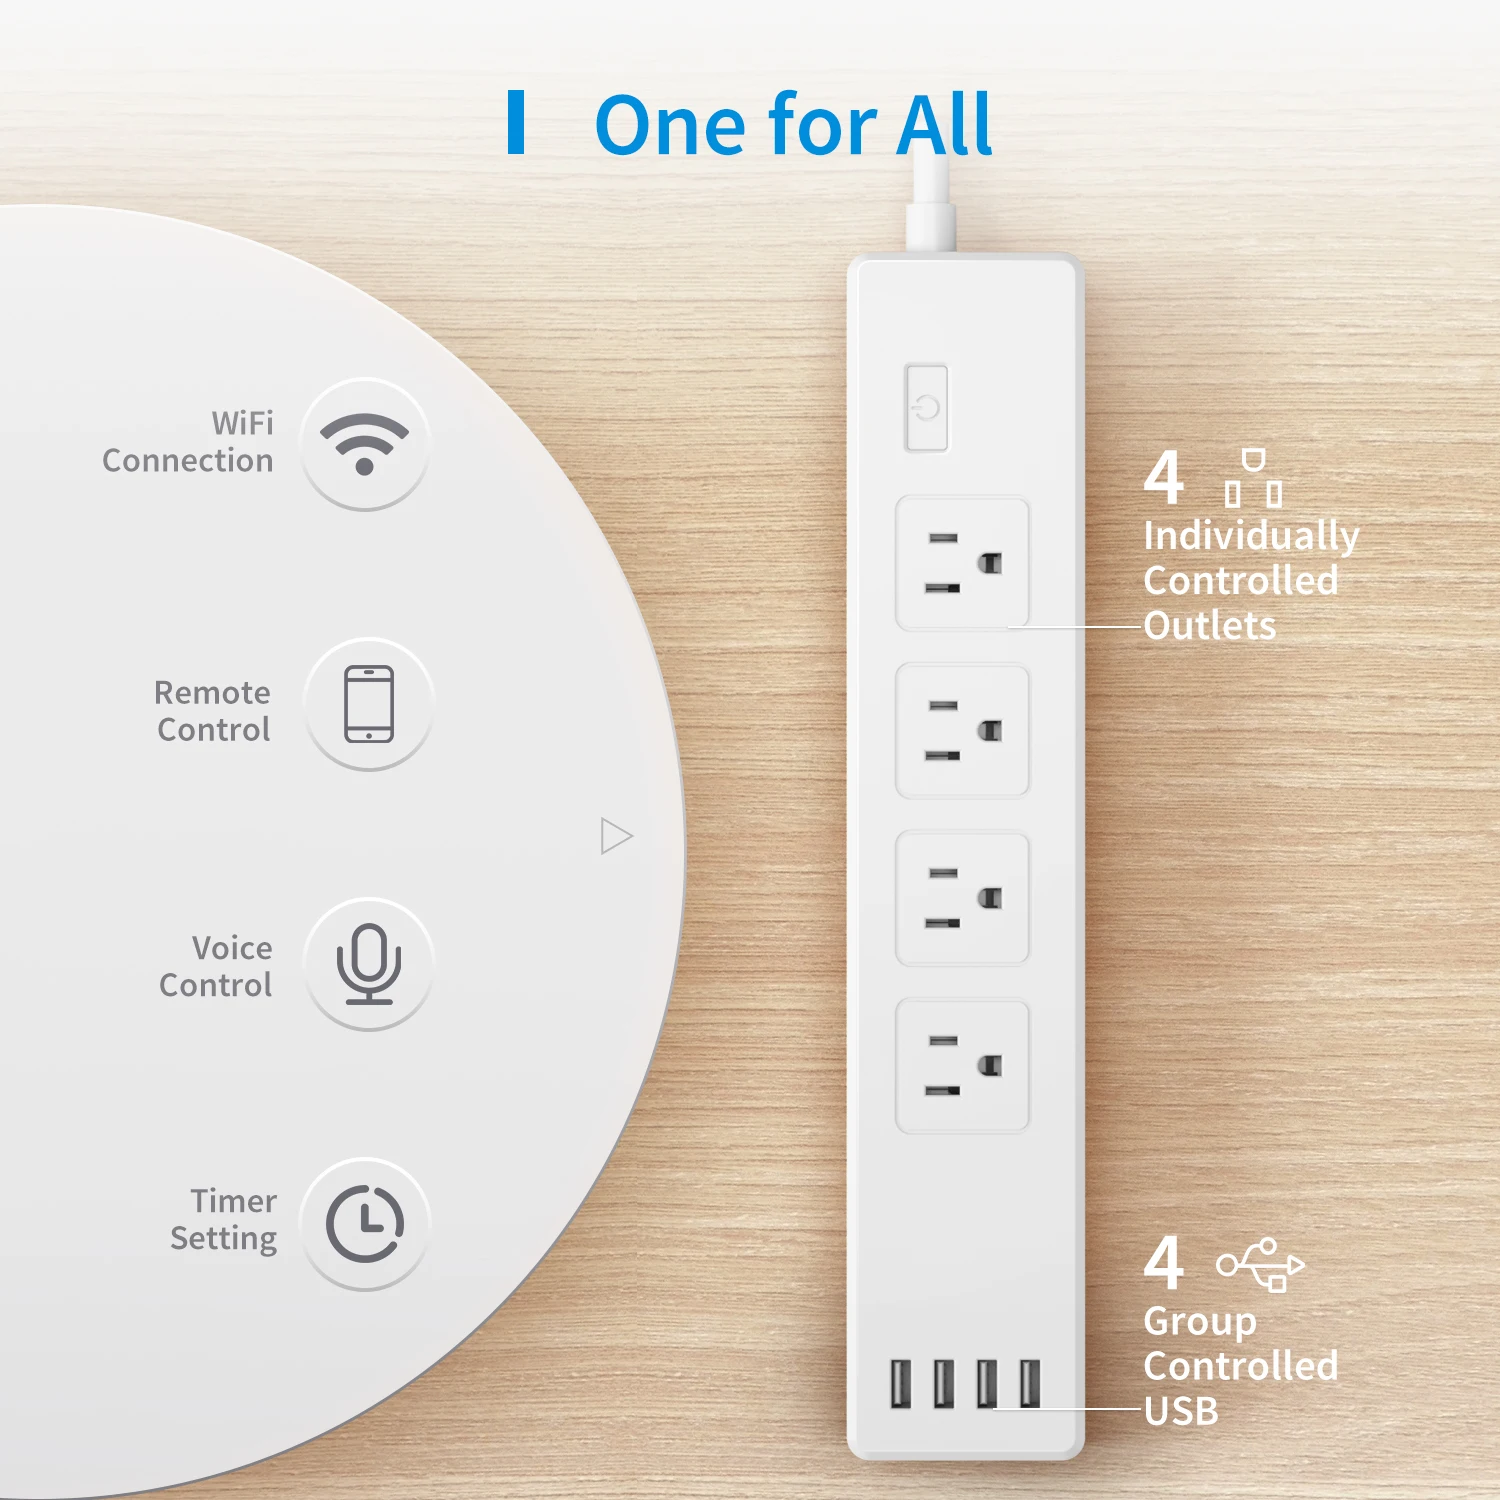 https://ae01.alicdn.com/kf/A9e7f9e4a2e0d4750a291d2dbe0467e1dZ/Meross-Smart-Power-Strip-WiFi-Surge-Protector-US-UK-Socket-Extension-with-4-AC-Outlets-4.jpg